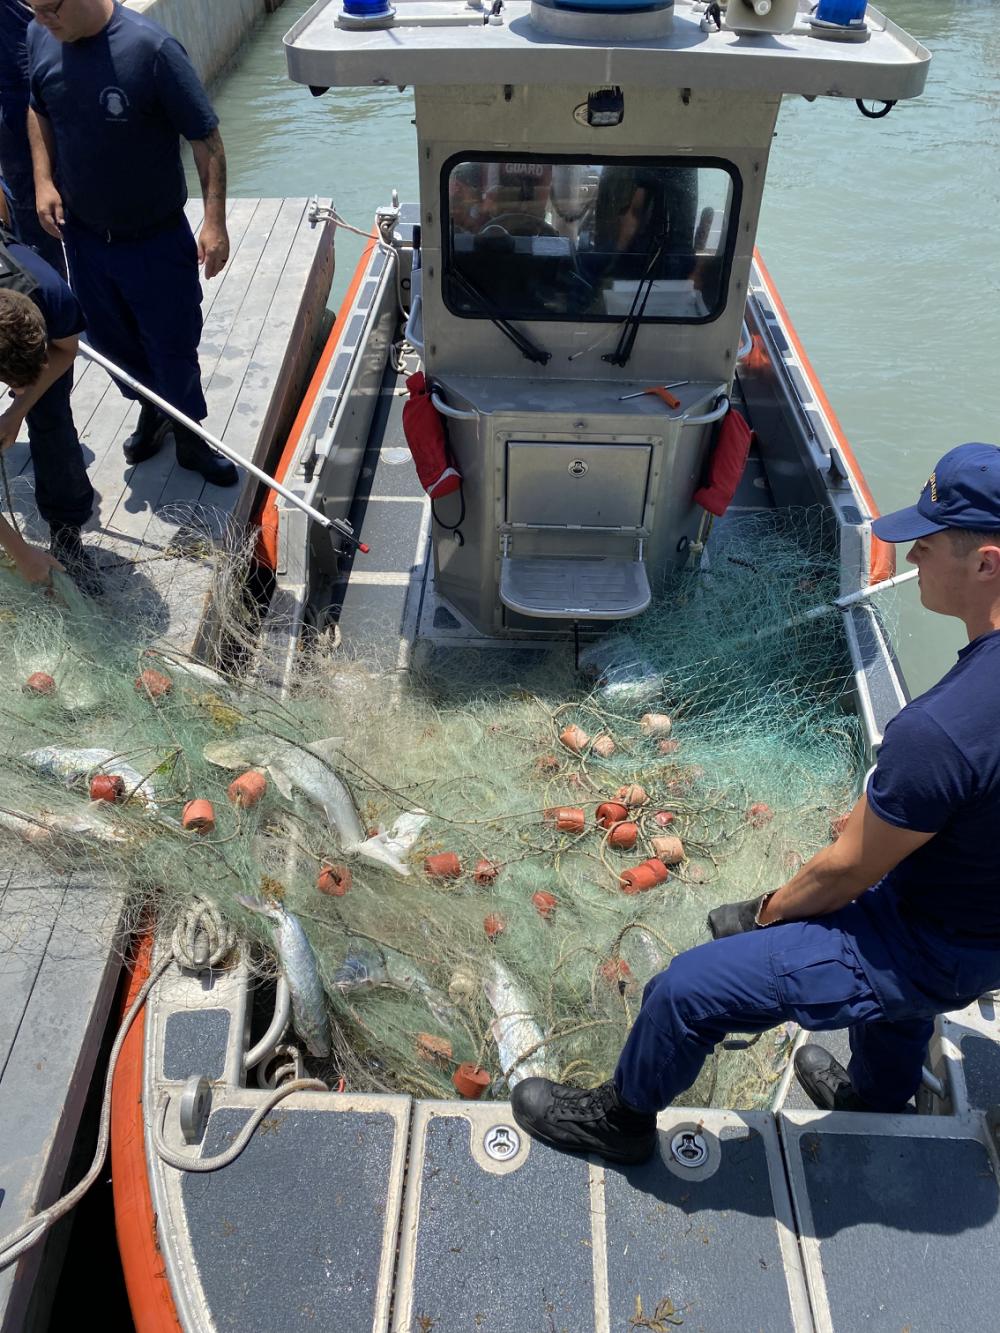 A Coast Guard Station South Padre Island boat crew cuts a dolphin free from illegal fishing nets near South Padre Island, Texas, May 4, 2022. After receiving a call from a boater about the entangled dolphin a Station South Padre Island 24-foot Special Purpose Craft-Shallow Water boat crew launched to respond. The crew freed the dolphin and removed the illegal fishing gear from the water. (U.S. Coast Guard photo by Seaman Lacie Kraatz)